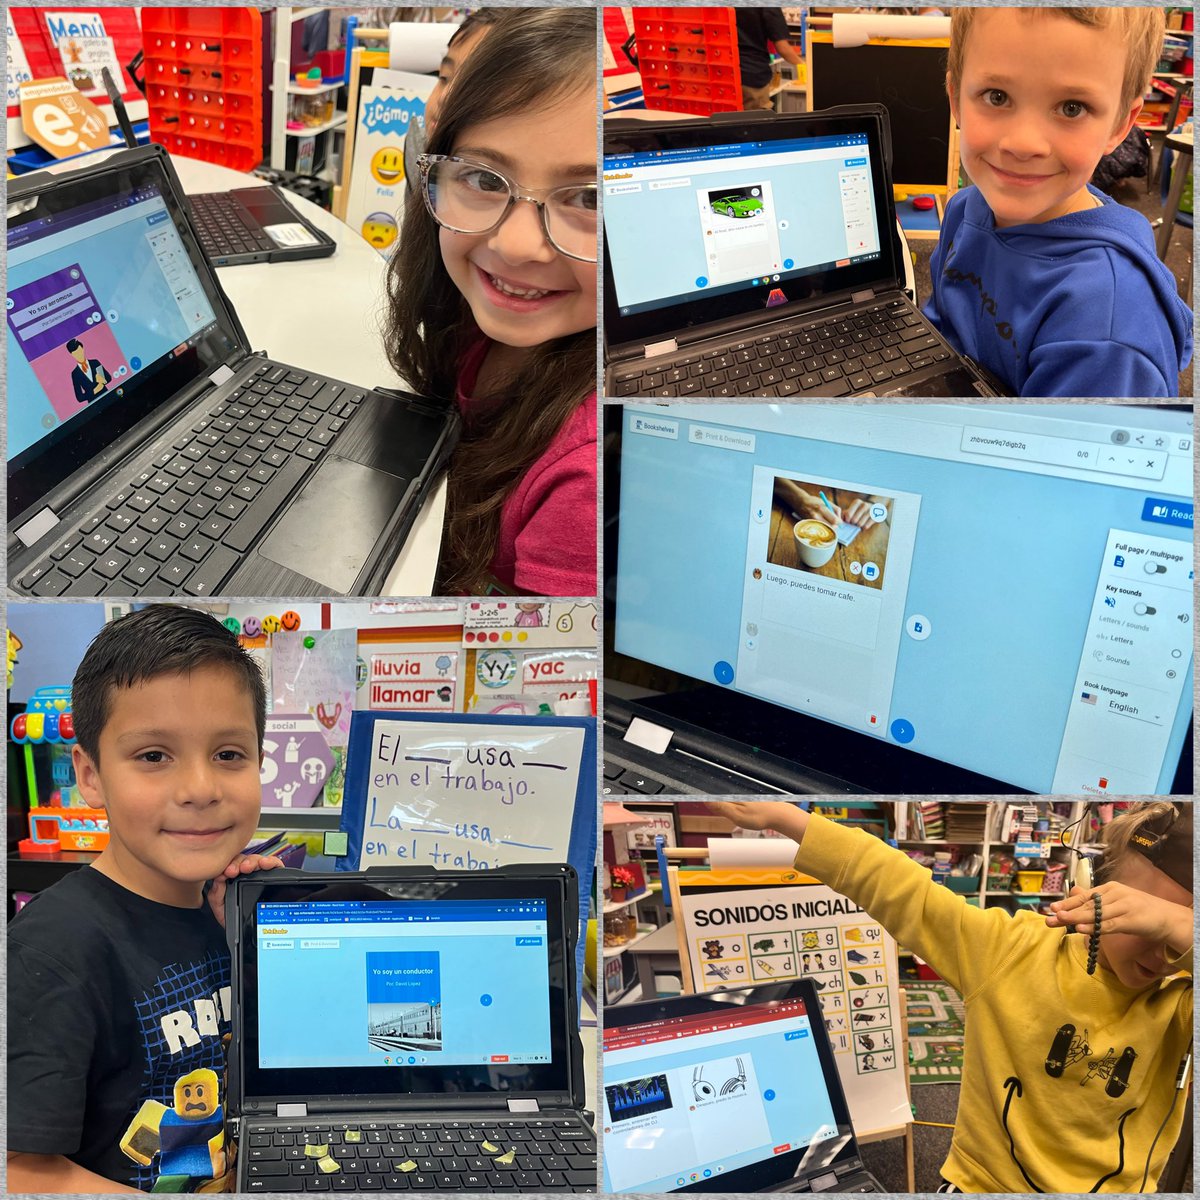 We love using @WriteReaderApp to write books about our #RIASEC future occupations!From train conductor,to flight attendant,video game designer, &DJ these writers are @CVWorldofWork experts.#bilingualwriters @BostoniaGlobal @CajonValleyUSD @MtraRamosR @Danya_BGlobal @NerelWinter